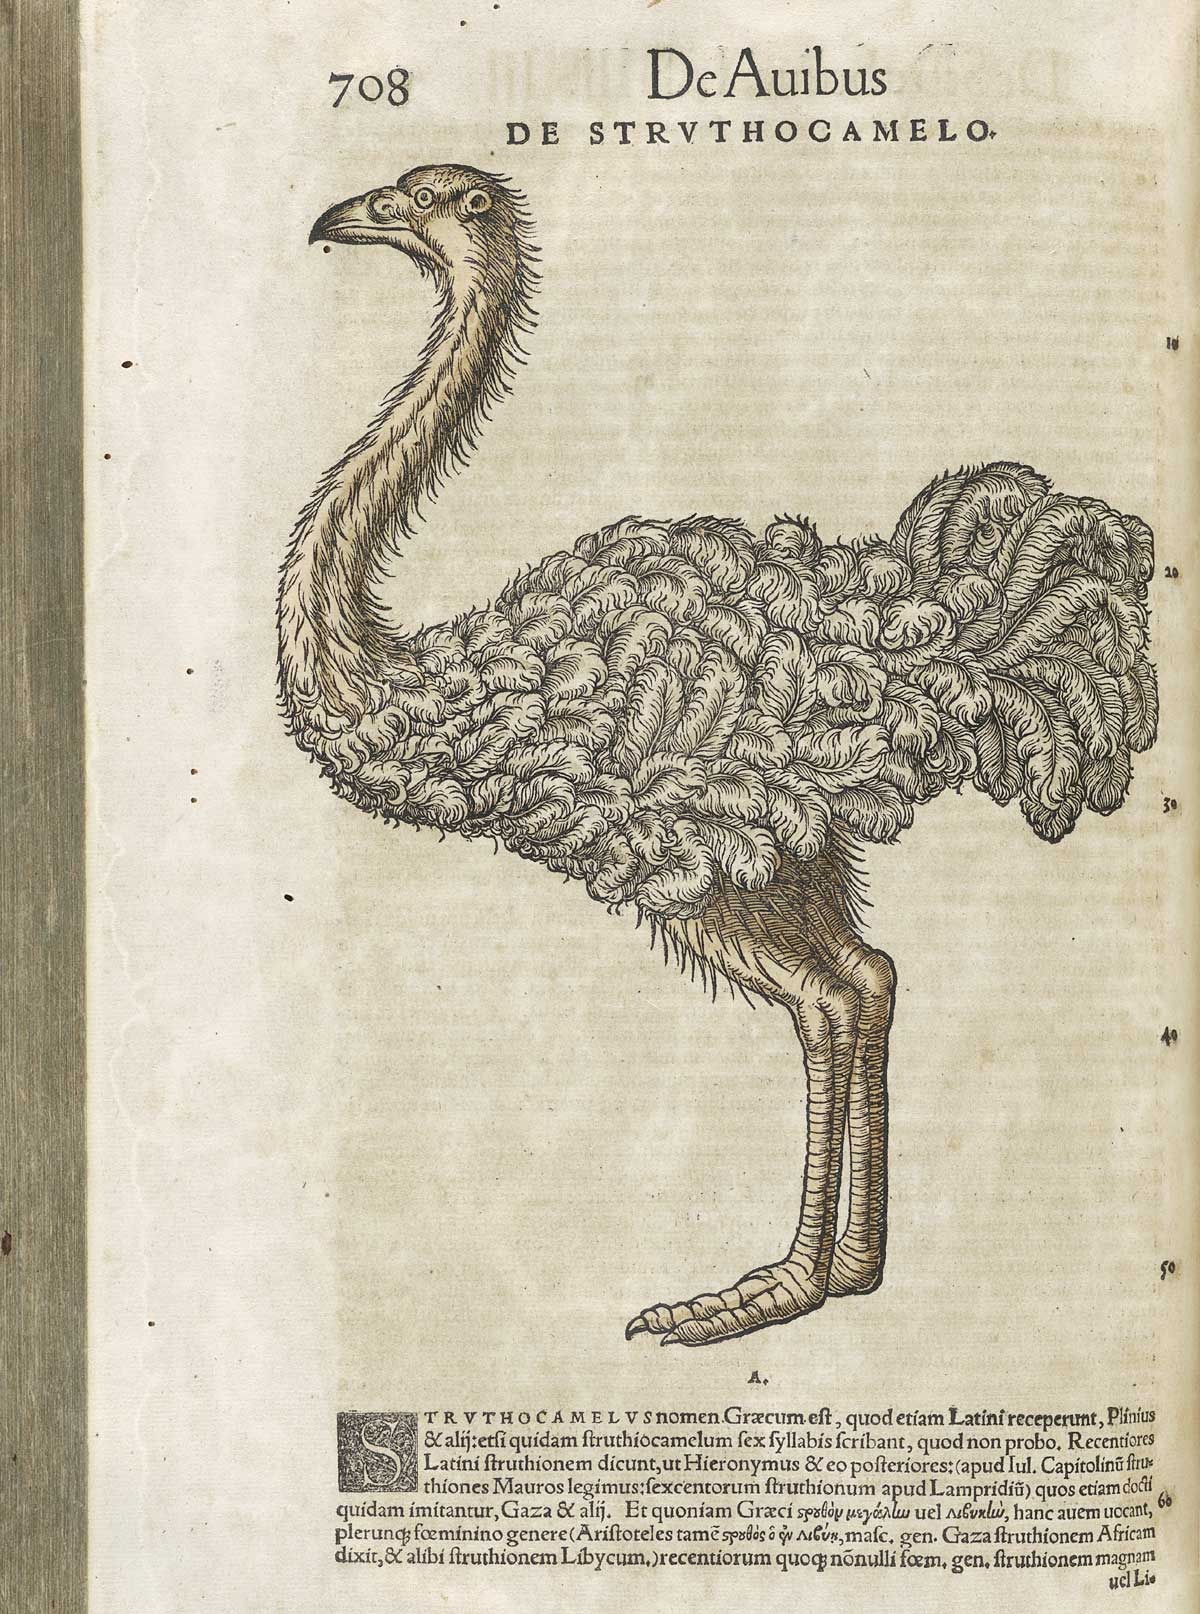 Page 708 from volume 3 of Conrad Gessner's Conradi Gesneri medici Tigurini Historiae animalium, featuring the colored woodcut of de struthocamelo or an ostrich.